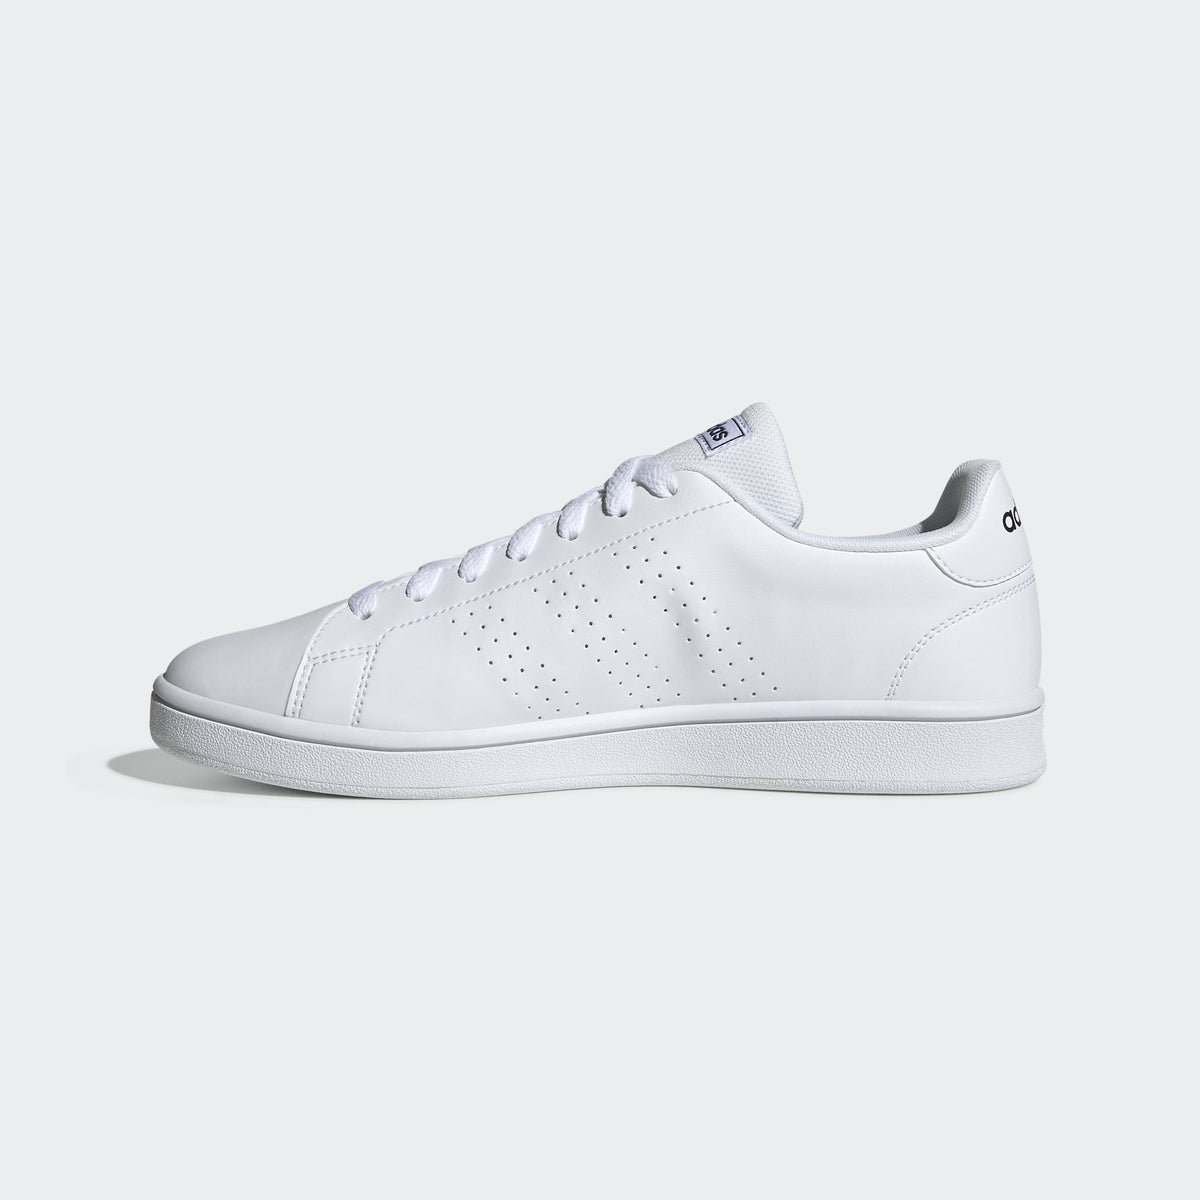 Order Adidas white leather tennis shoes | The SM Store